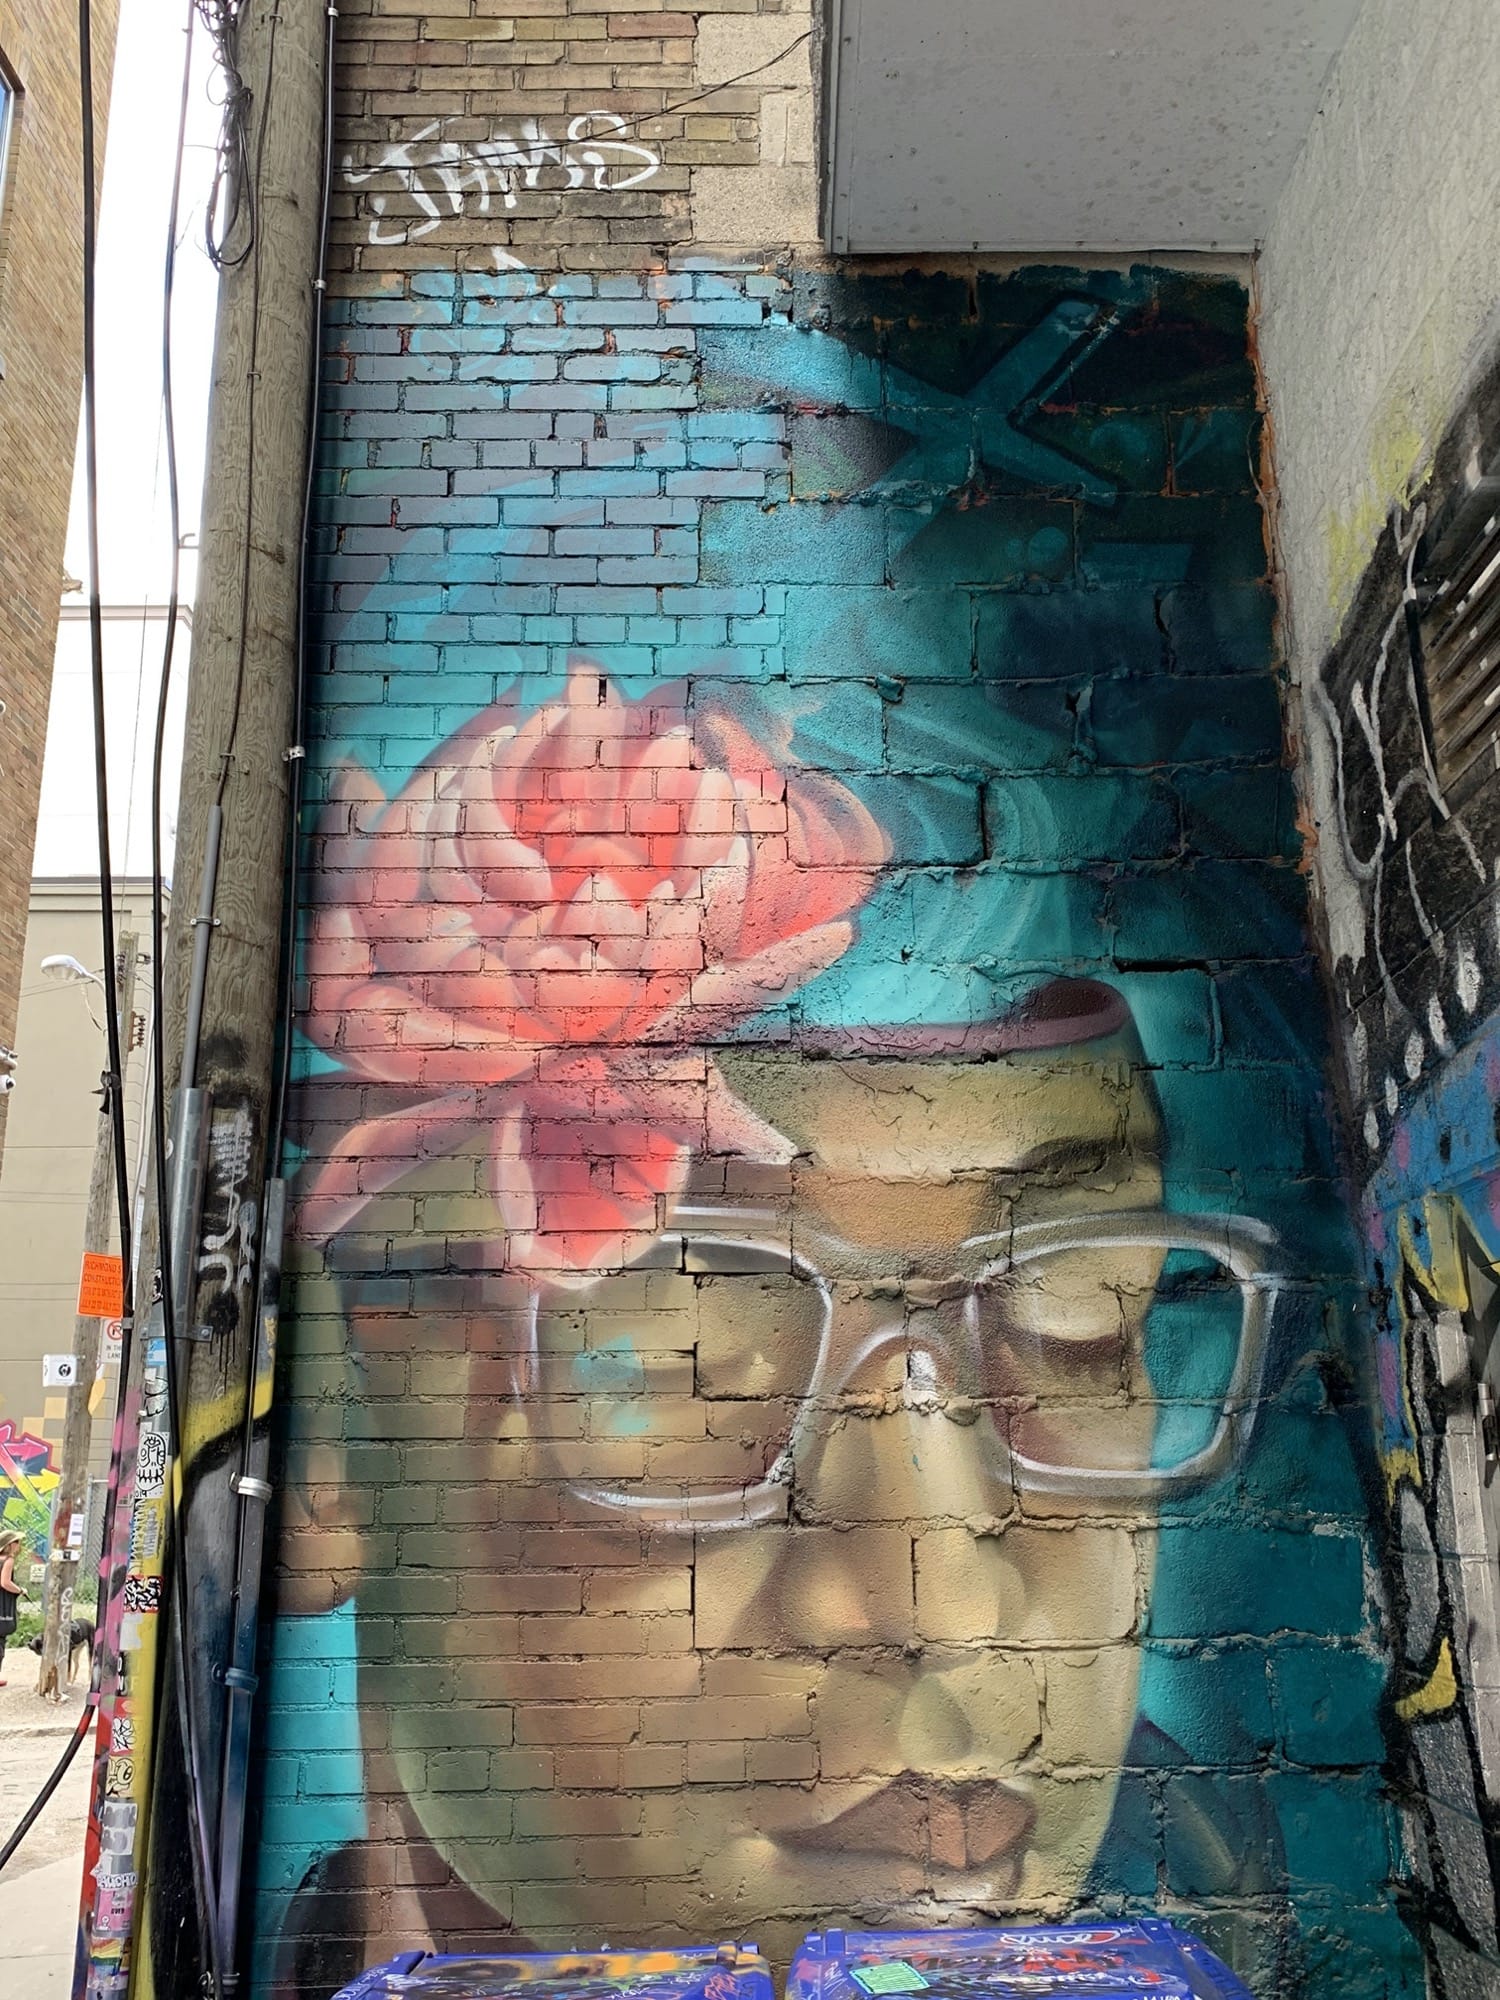 Graffiti 2572  captured by Rabot in Toronto Canada